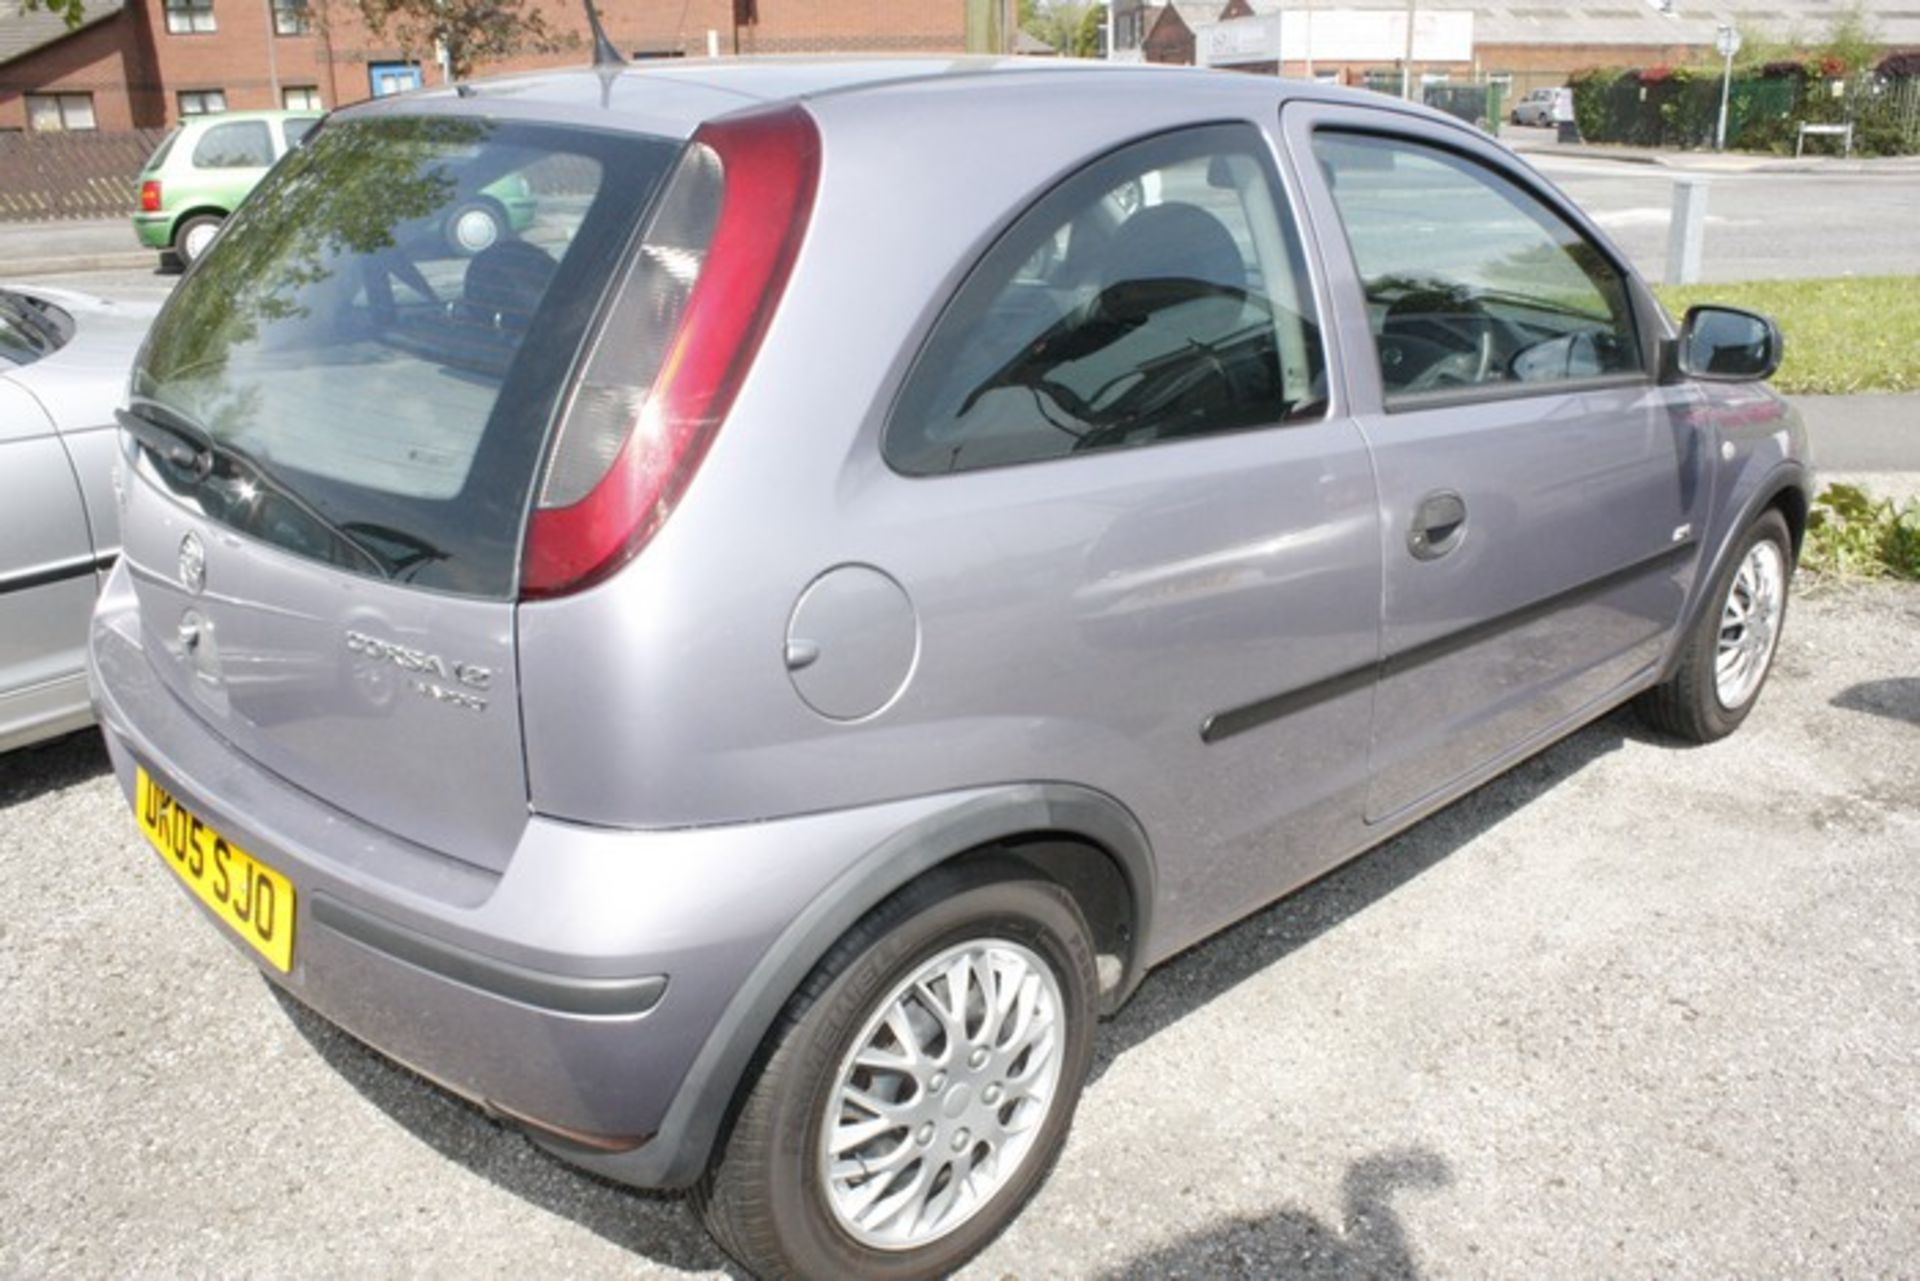 VAUXHALL CORSA LIFE TWIN PORT 1200CC IN SILVER, REGISTERED MARCH 2005, DK05 SJO, 12 MONTHS MOT, - Image 2 of 9